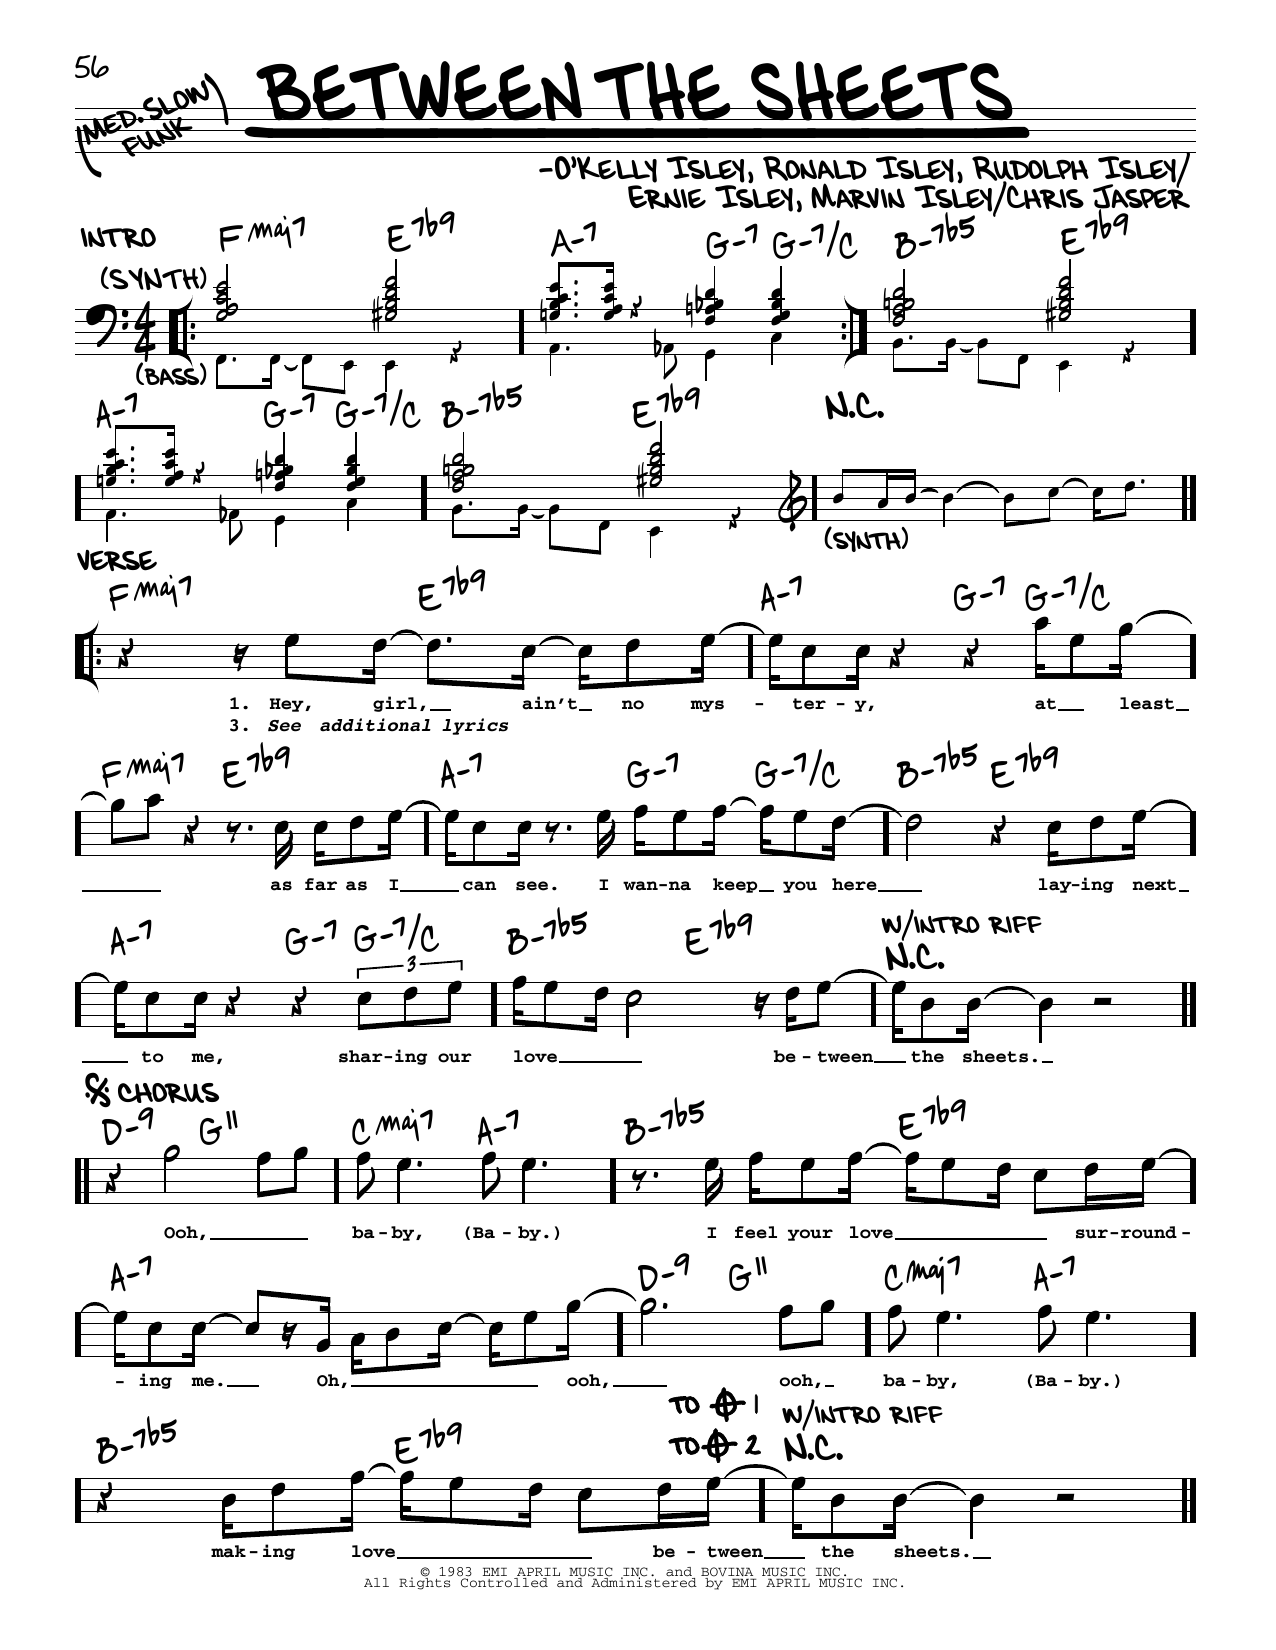 Download The Isley Brothers Between The Sheets Sheet Music